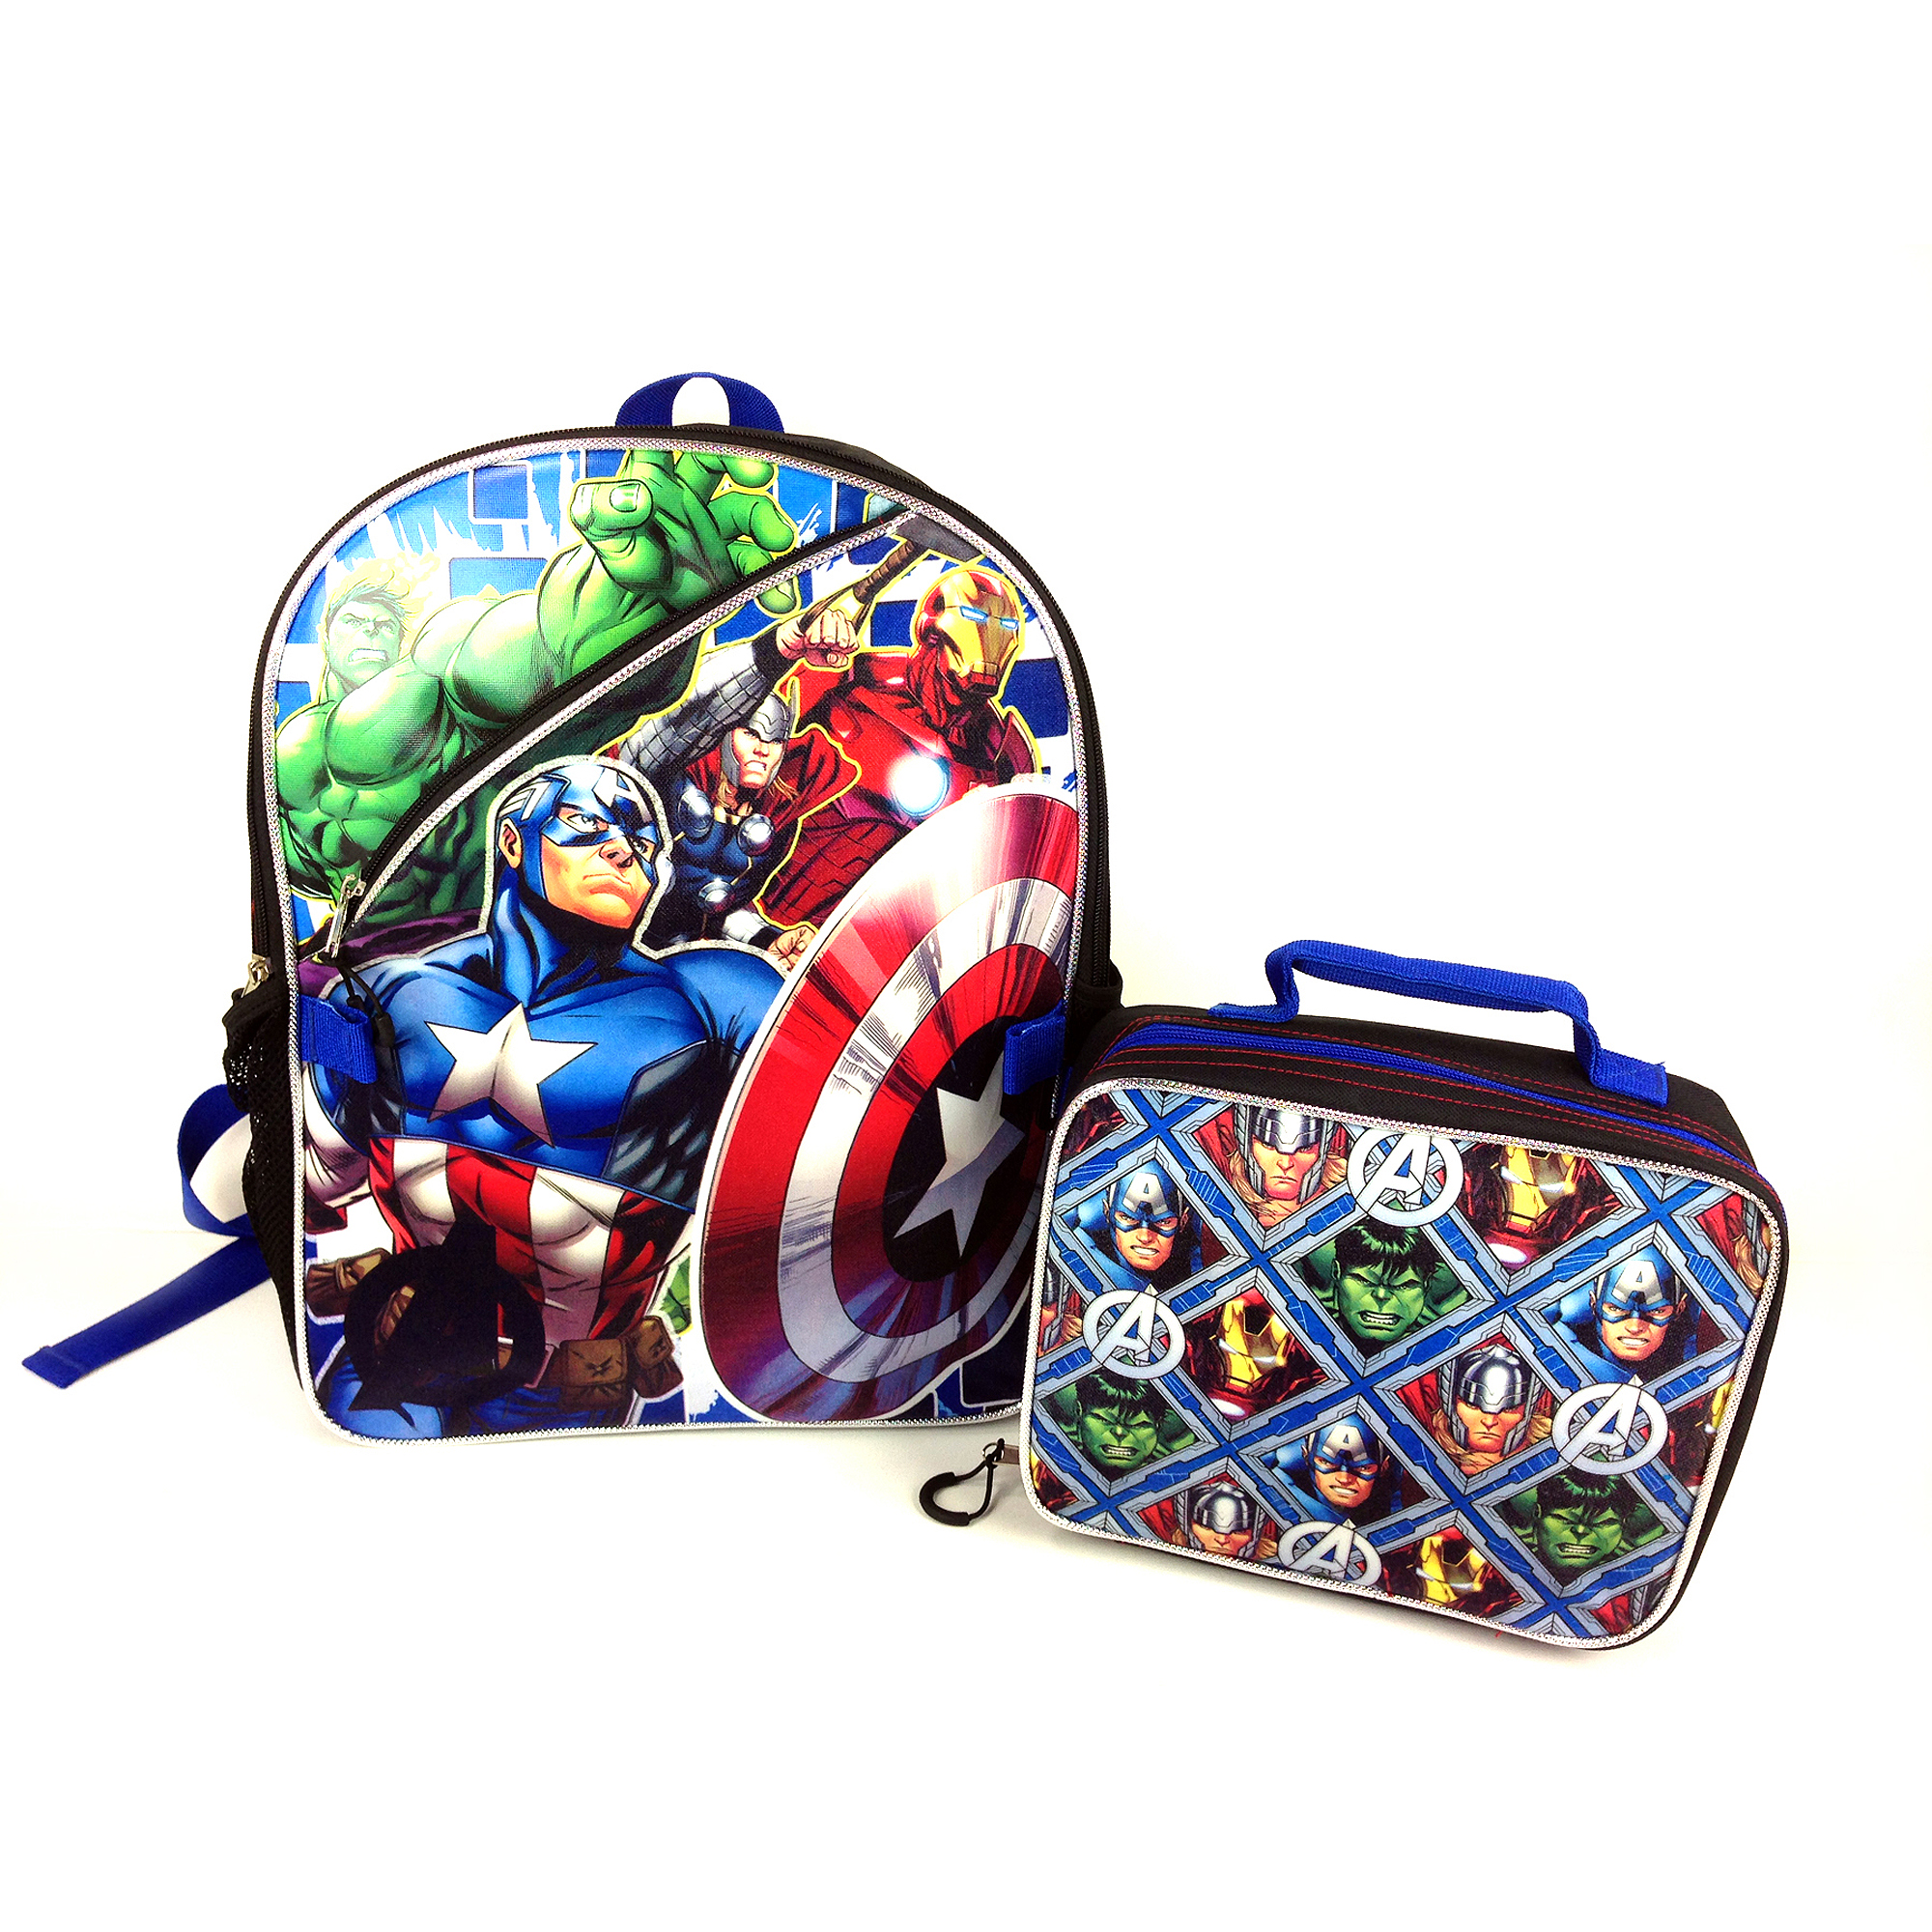 Marvel Avengers 16" Backpacks with Lunch Kit - image 2 of 3